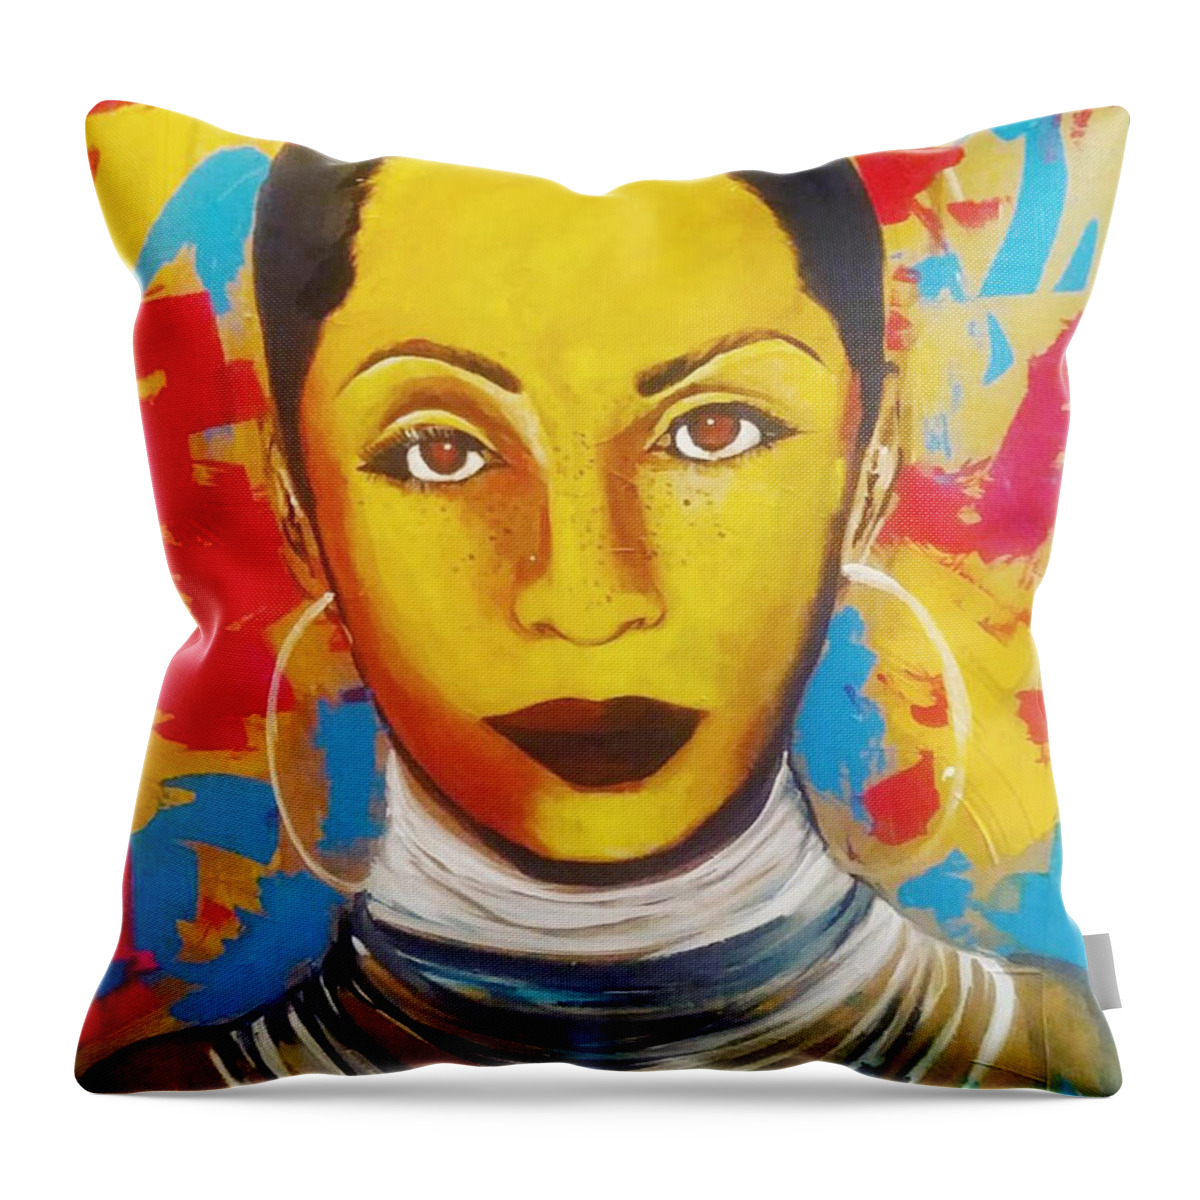 Sade Love Deluxe Throw Pillow featuring the painting Lovedeluxe by Femme Blaicasso